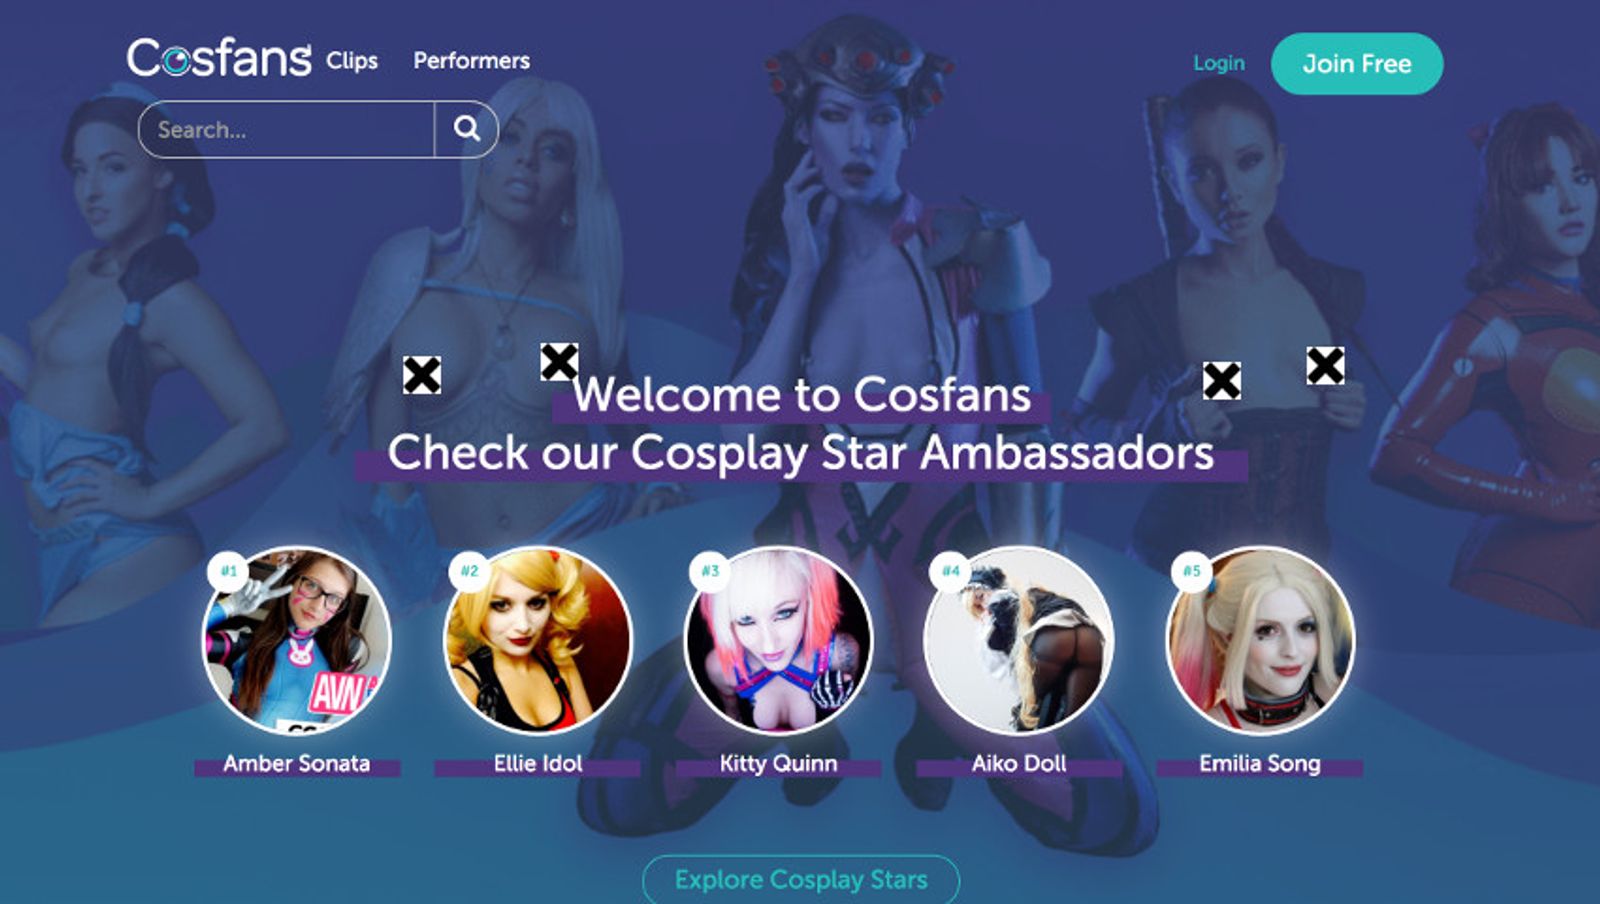 CosFans Clips Site Launches to Serve Cosplay Community